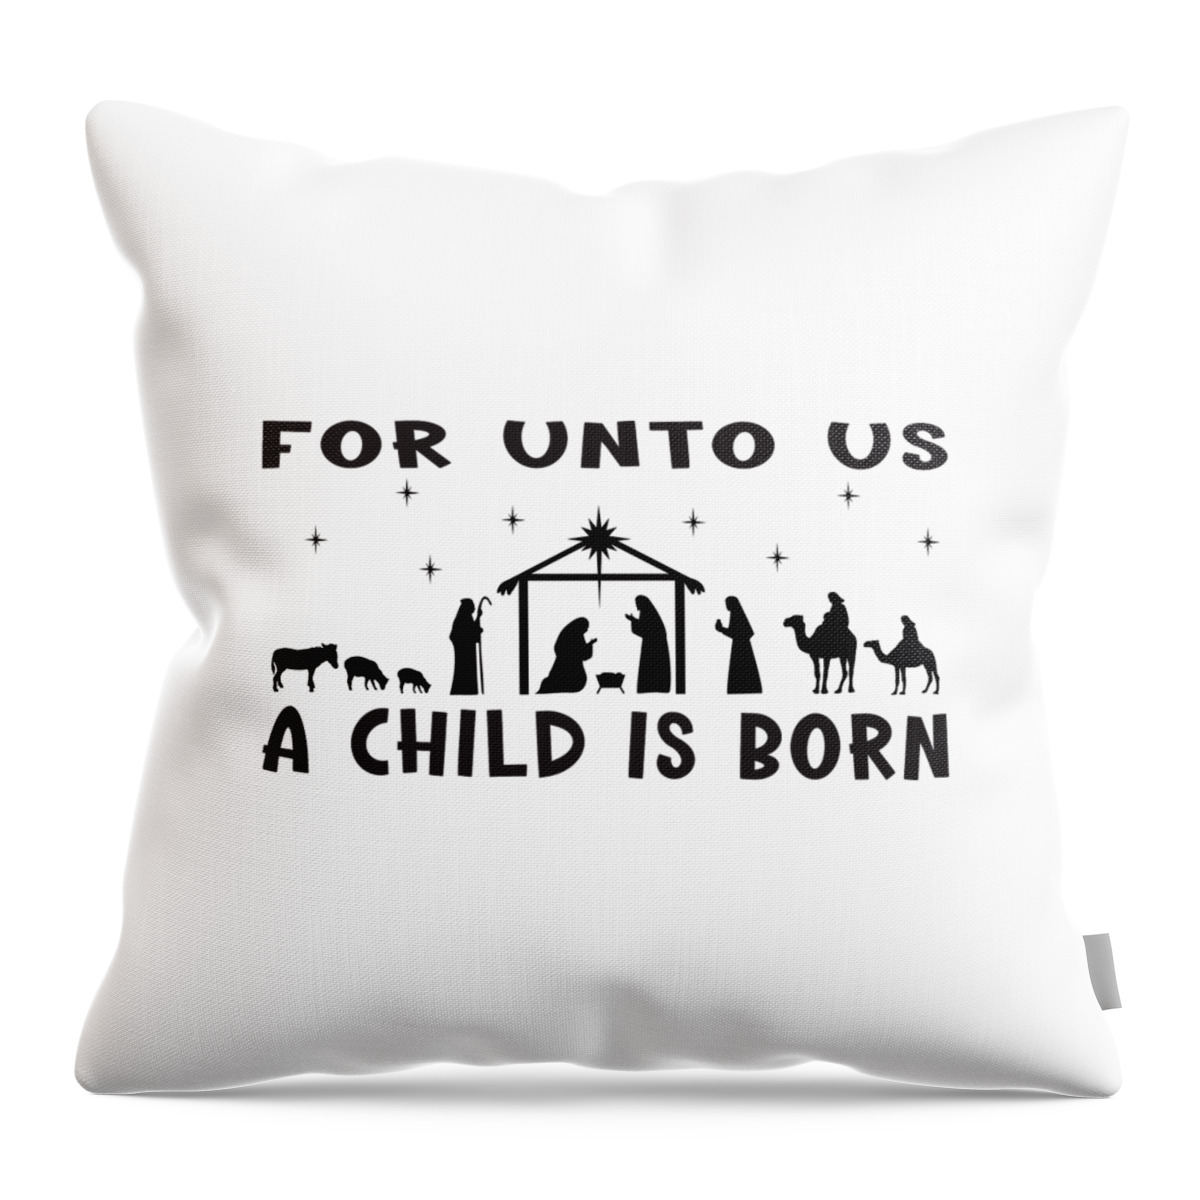 Christian Christmas Throw Pillow featuring the digital art Christian Christmas Nativity - For Unto Us A Child Is Born by Bob Pardue